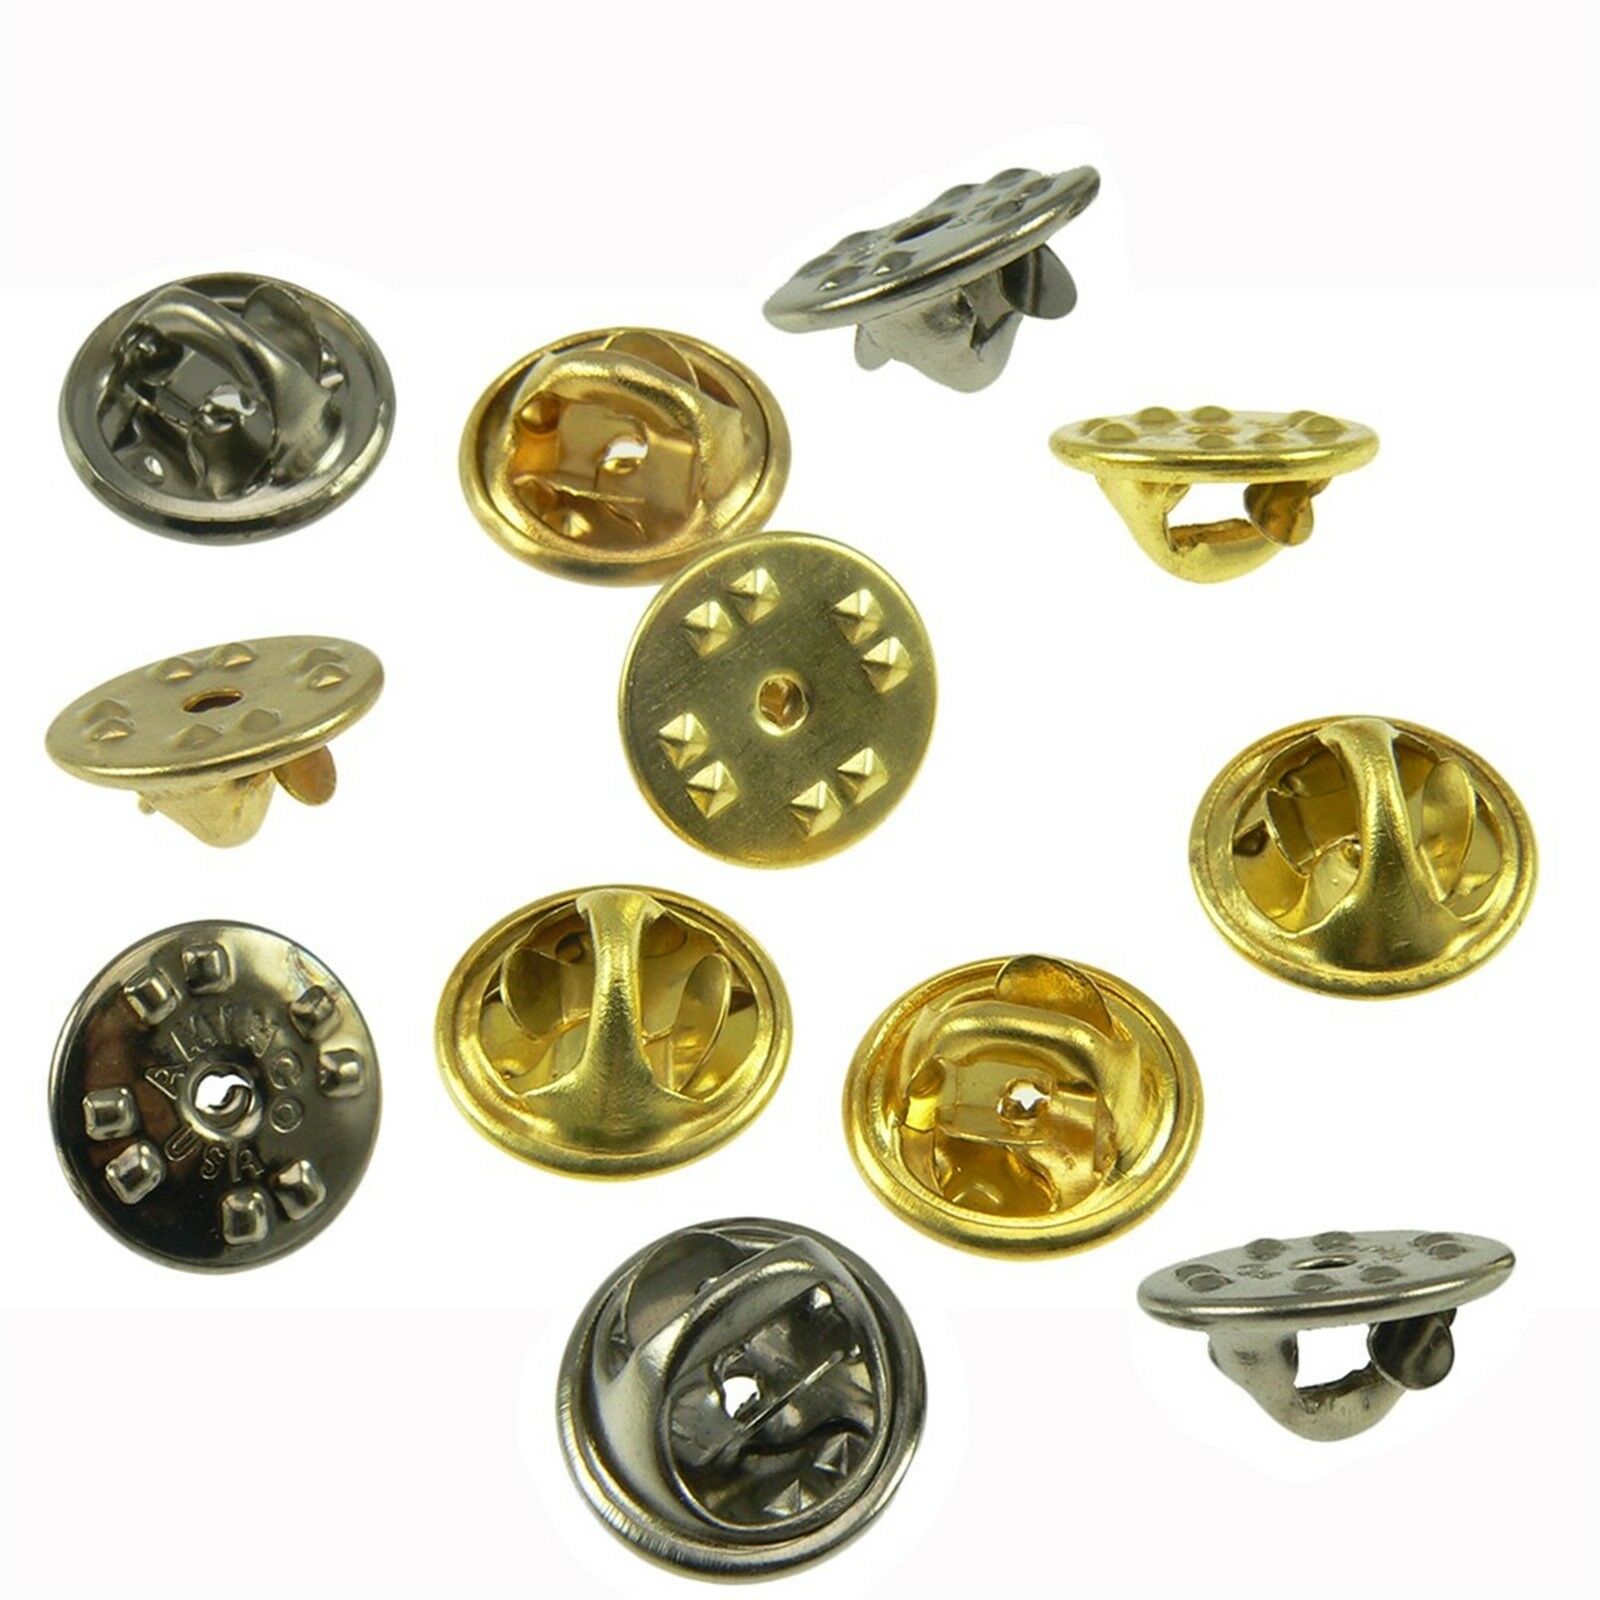 Qty 10-100 Brass Clutch Clasp Butterfly Military Pin Backs Guards Gold Chrome